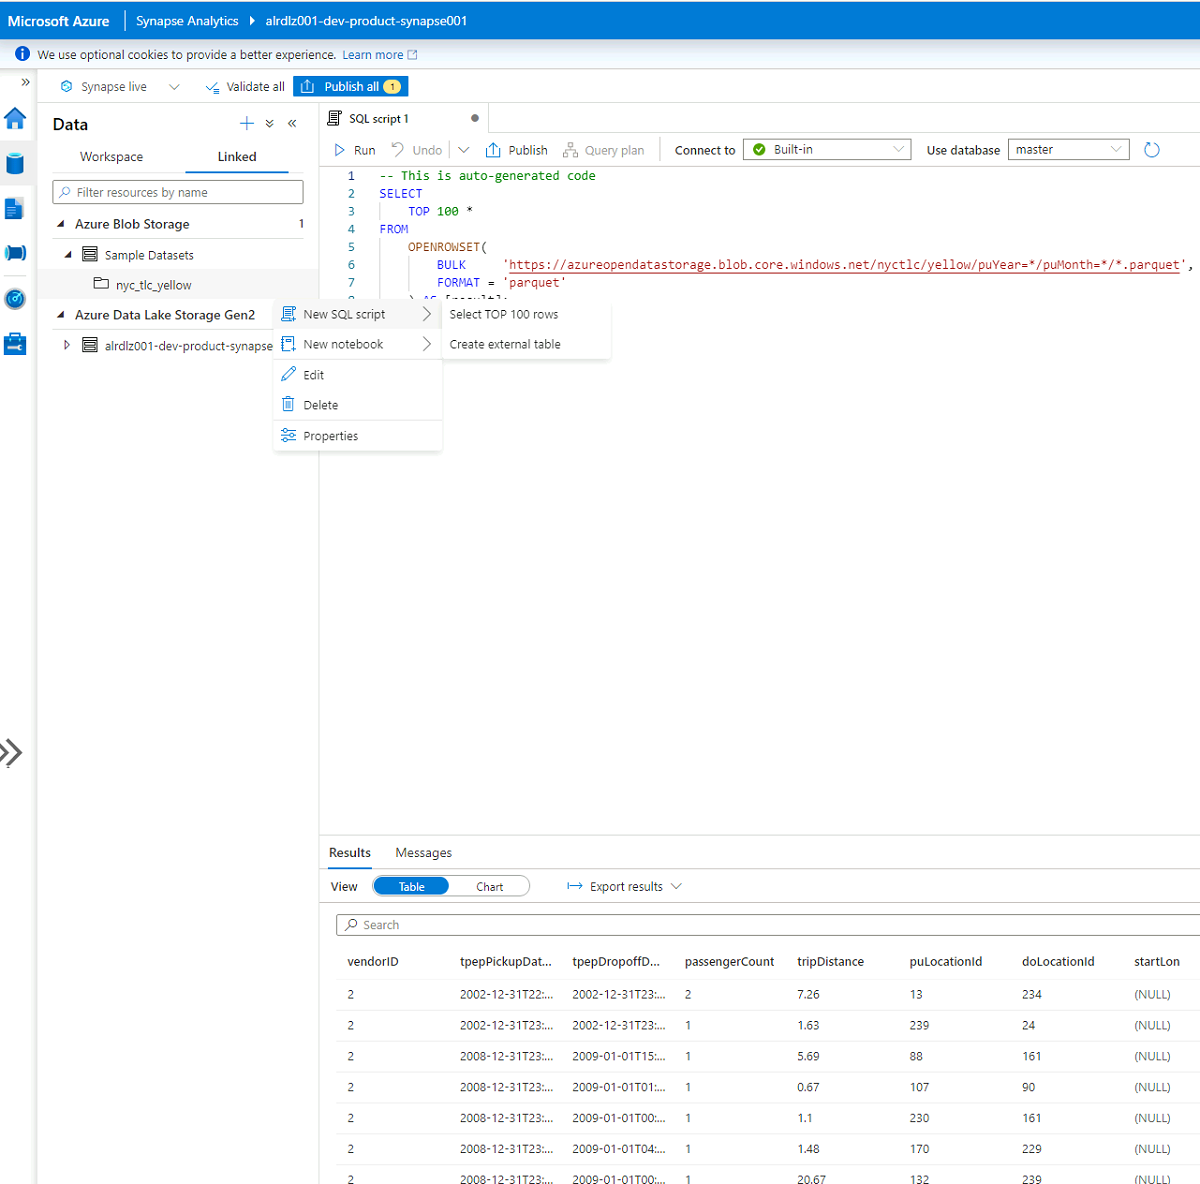 Screenshot of the Synapse Analytics pane for connect to a new SQL script.